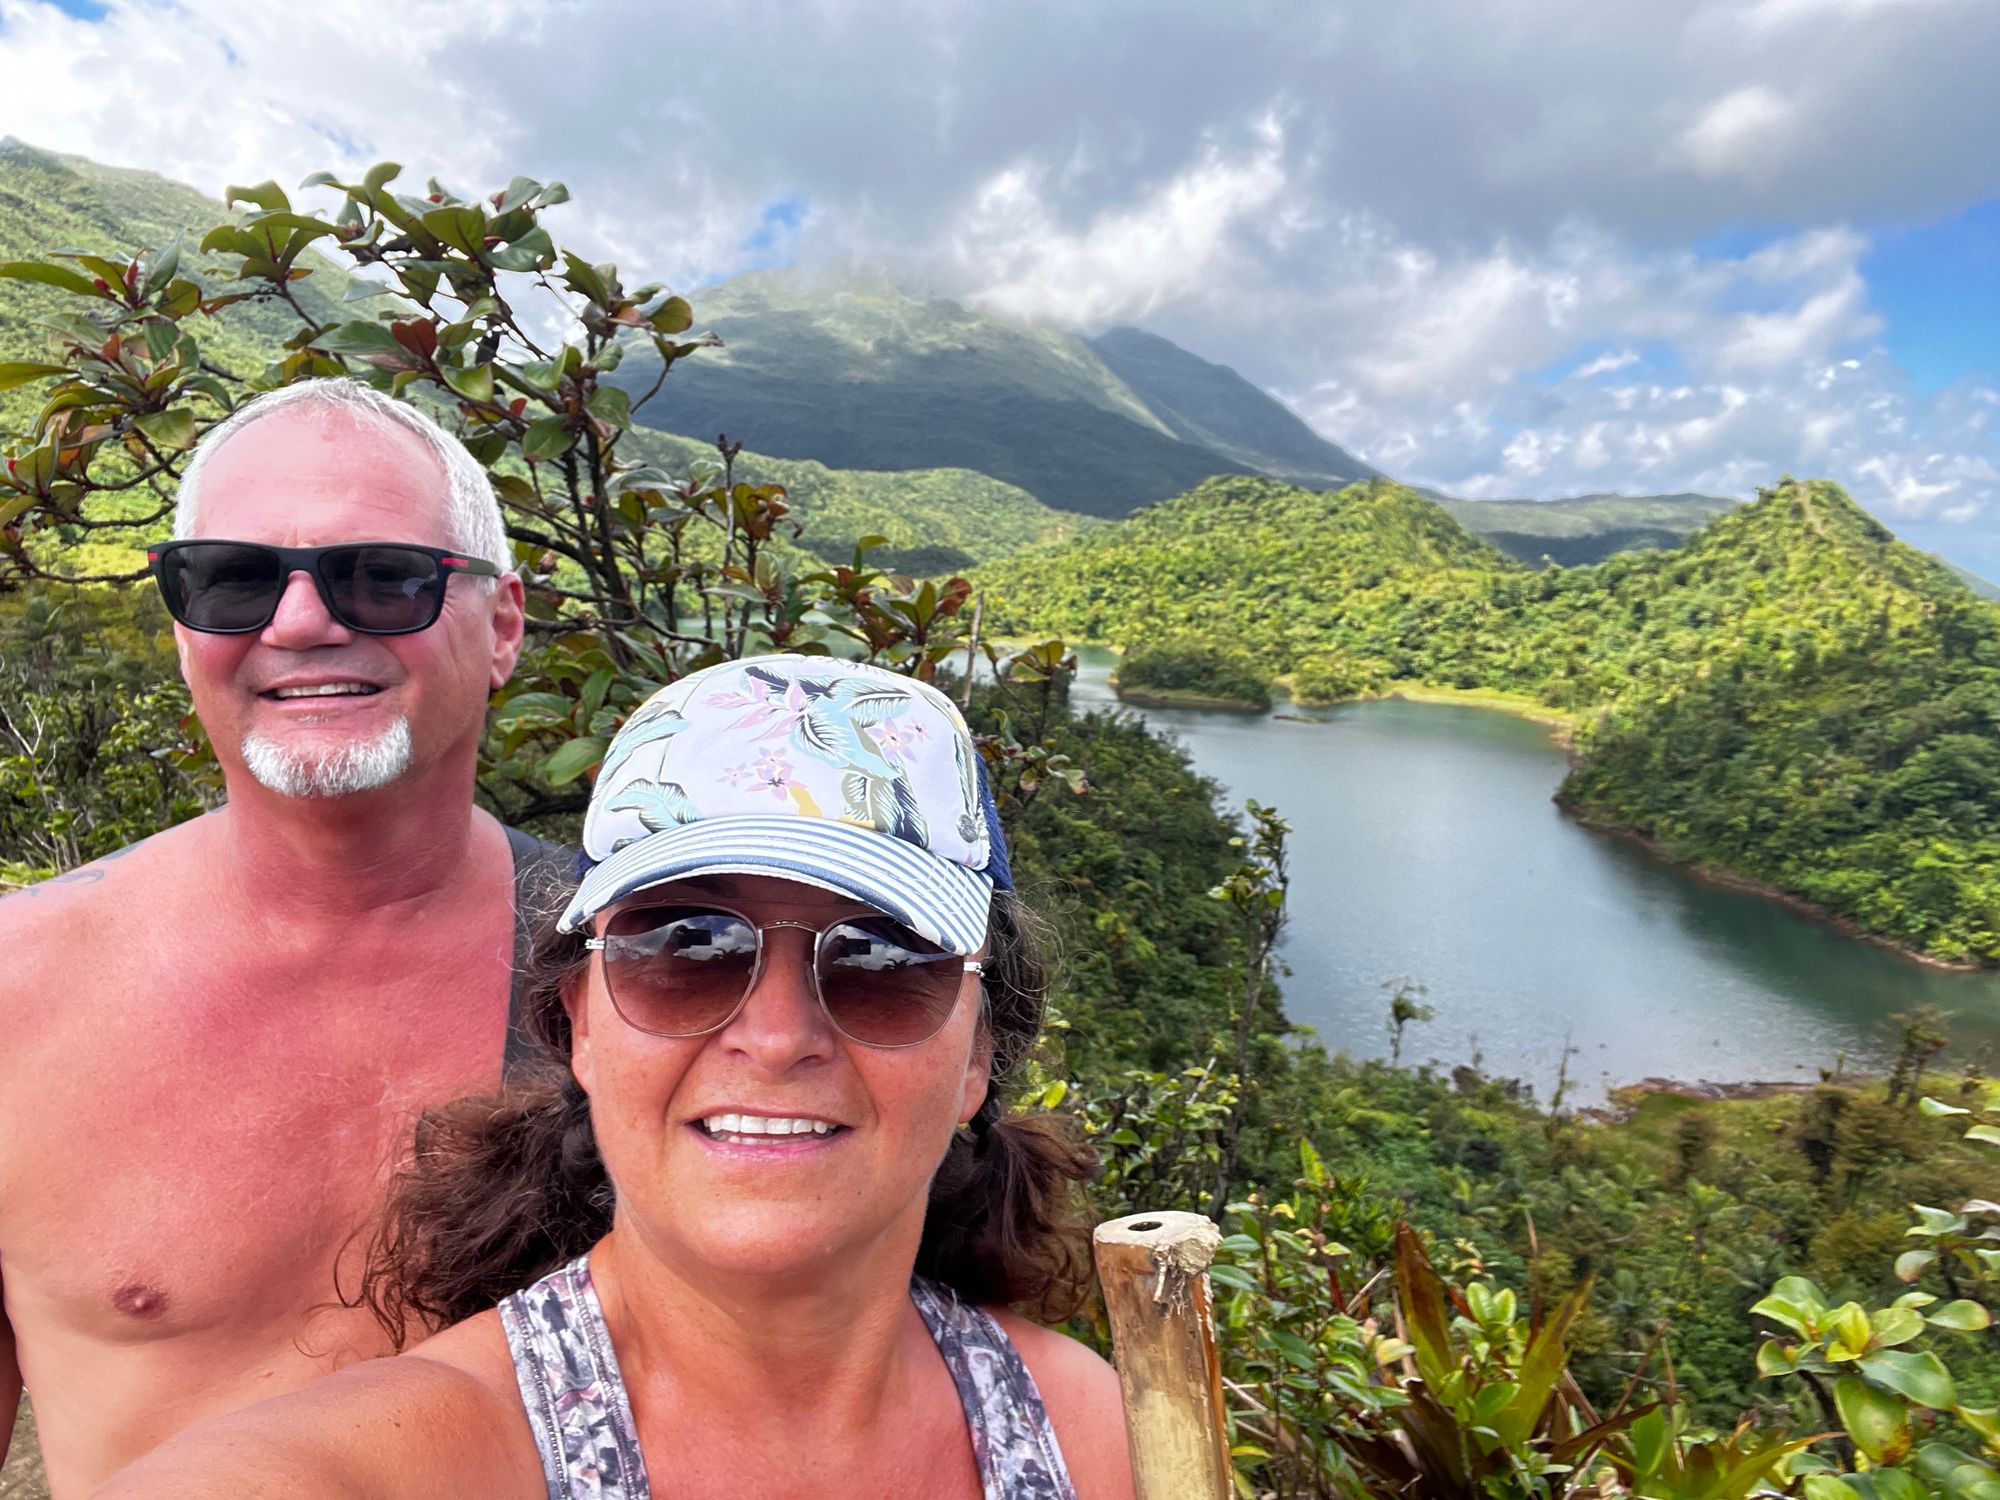 Couple hiking vacation activities in the Caribbean jungle